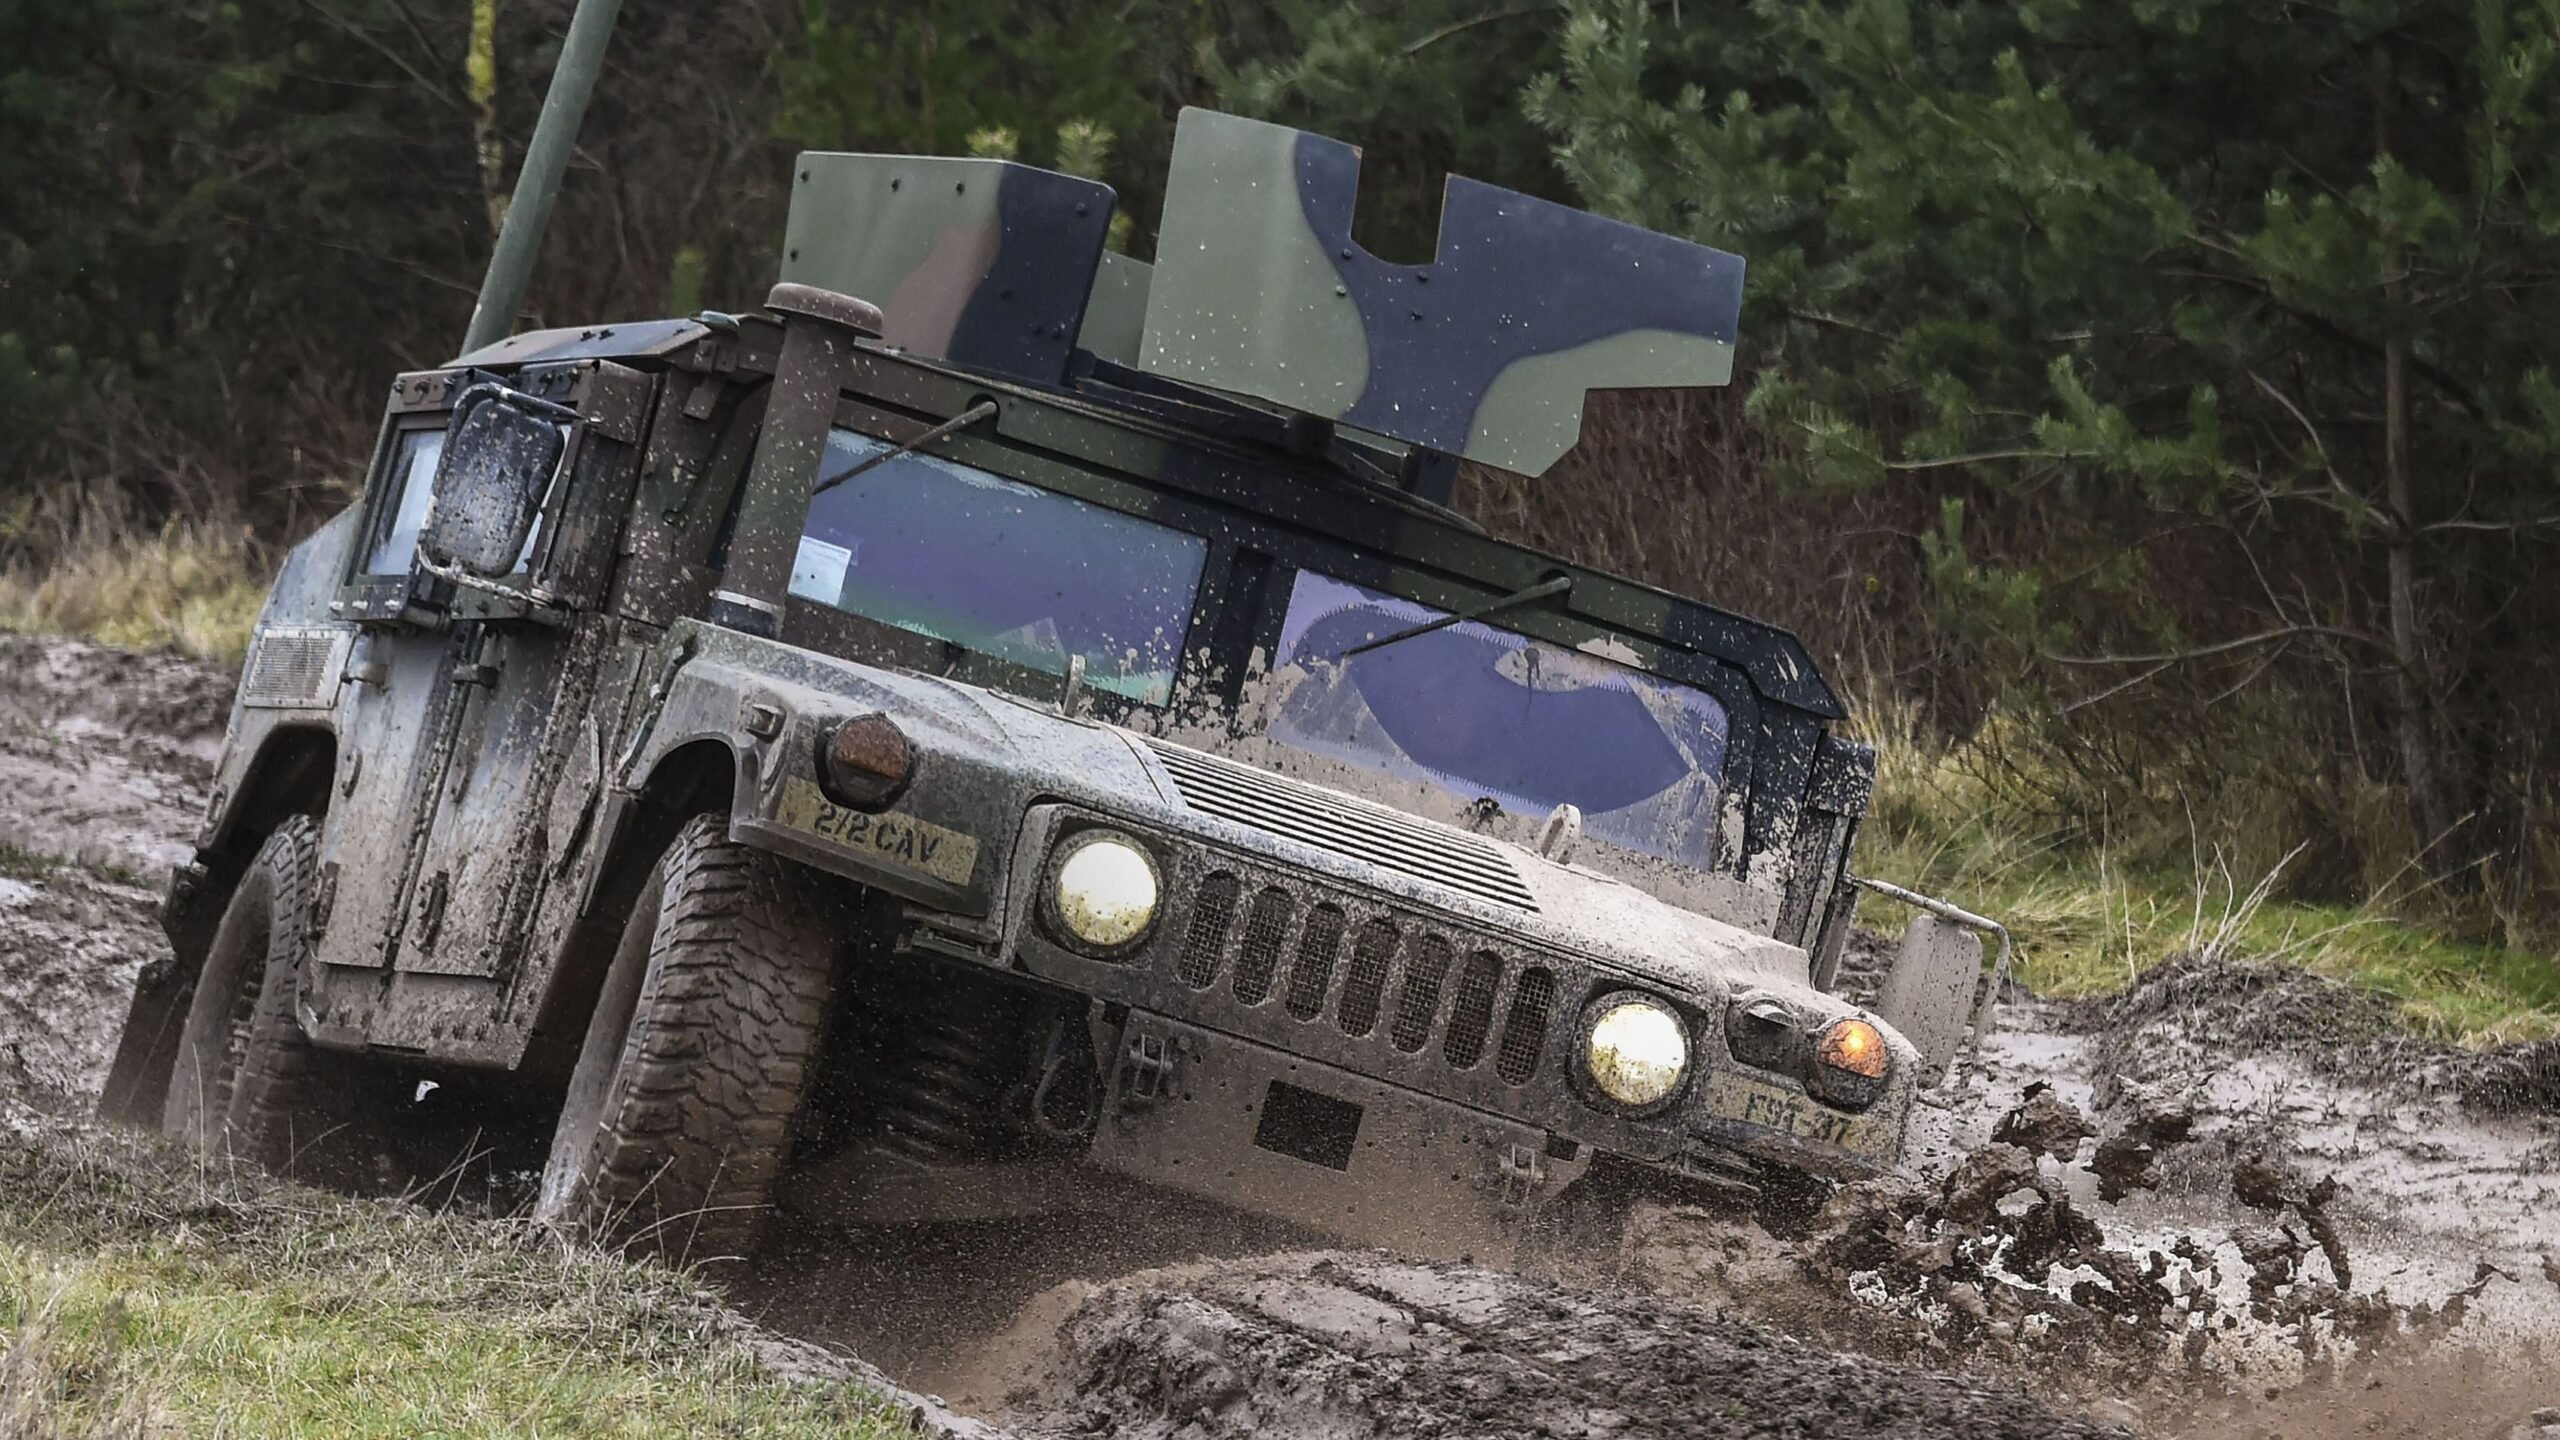 US Army to expand production of 3D-printed parts for HMMWV vehicles